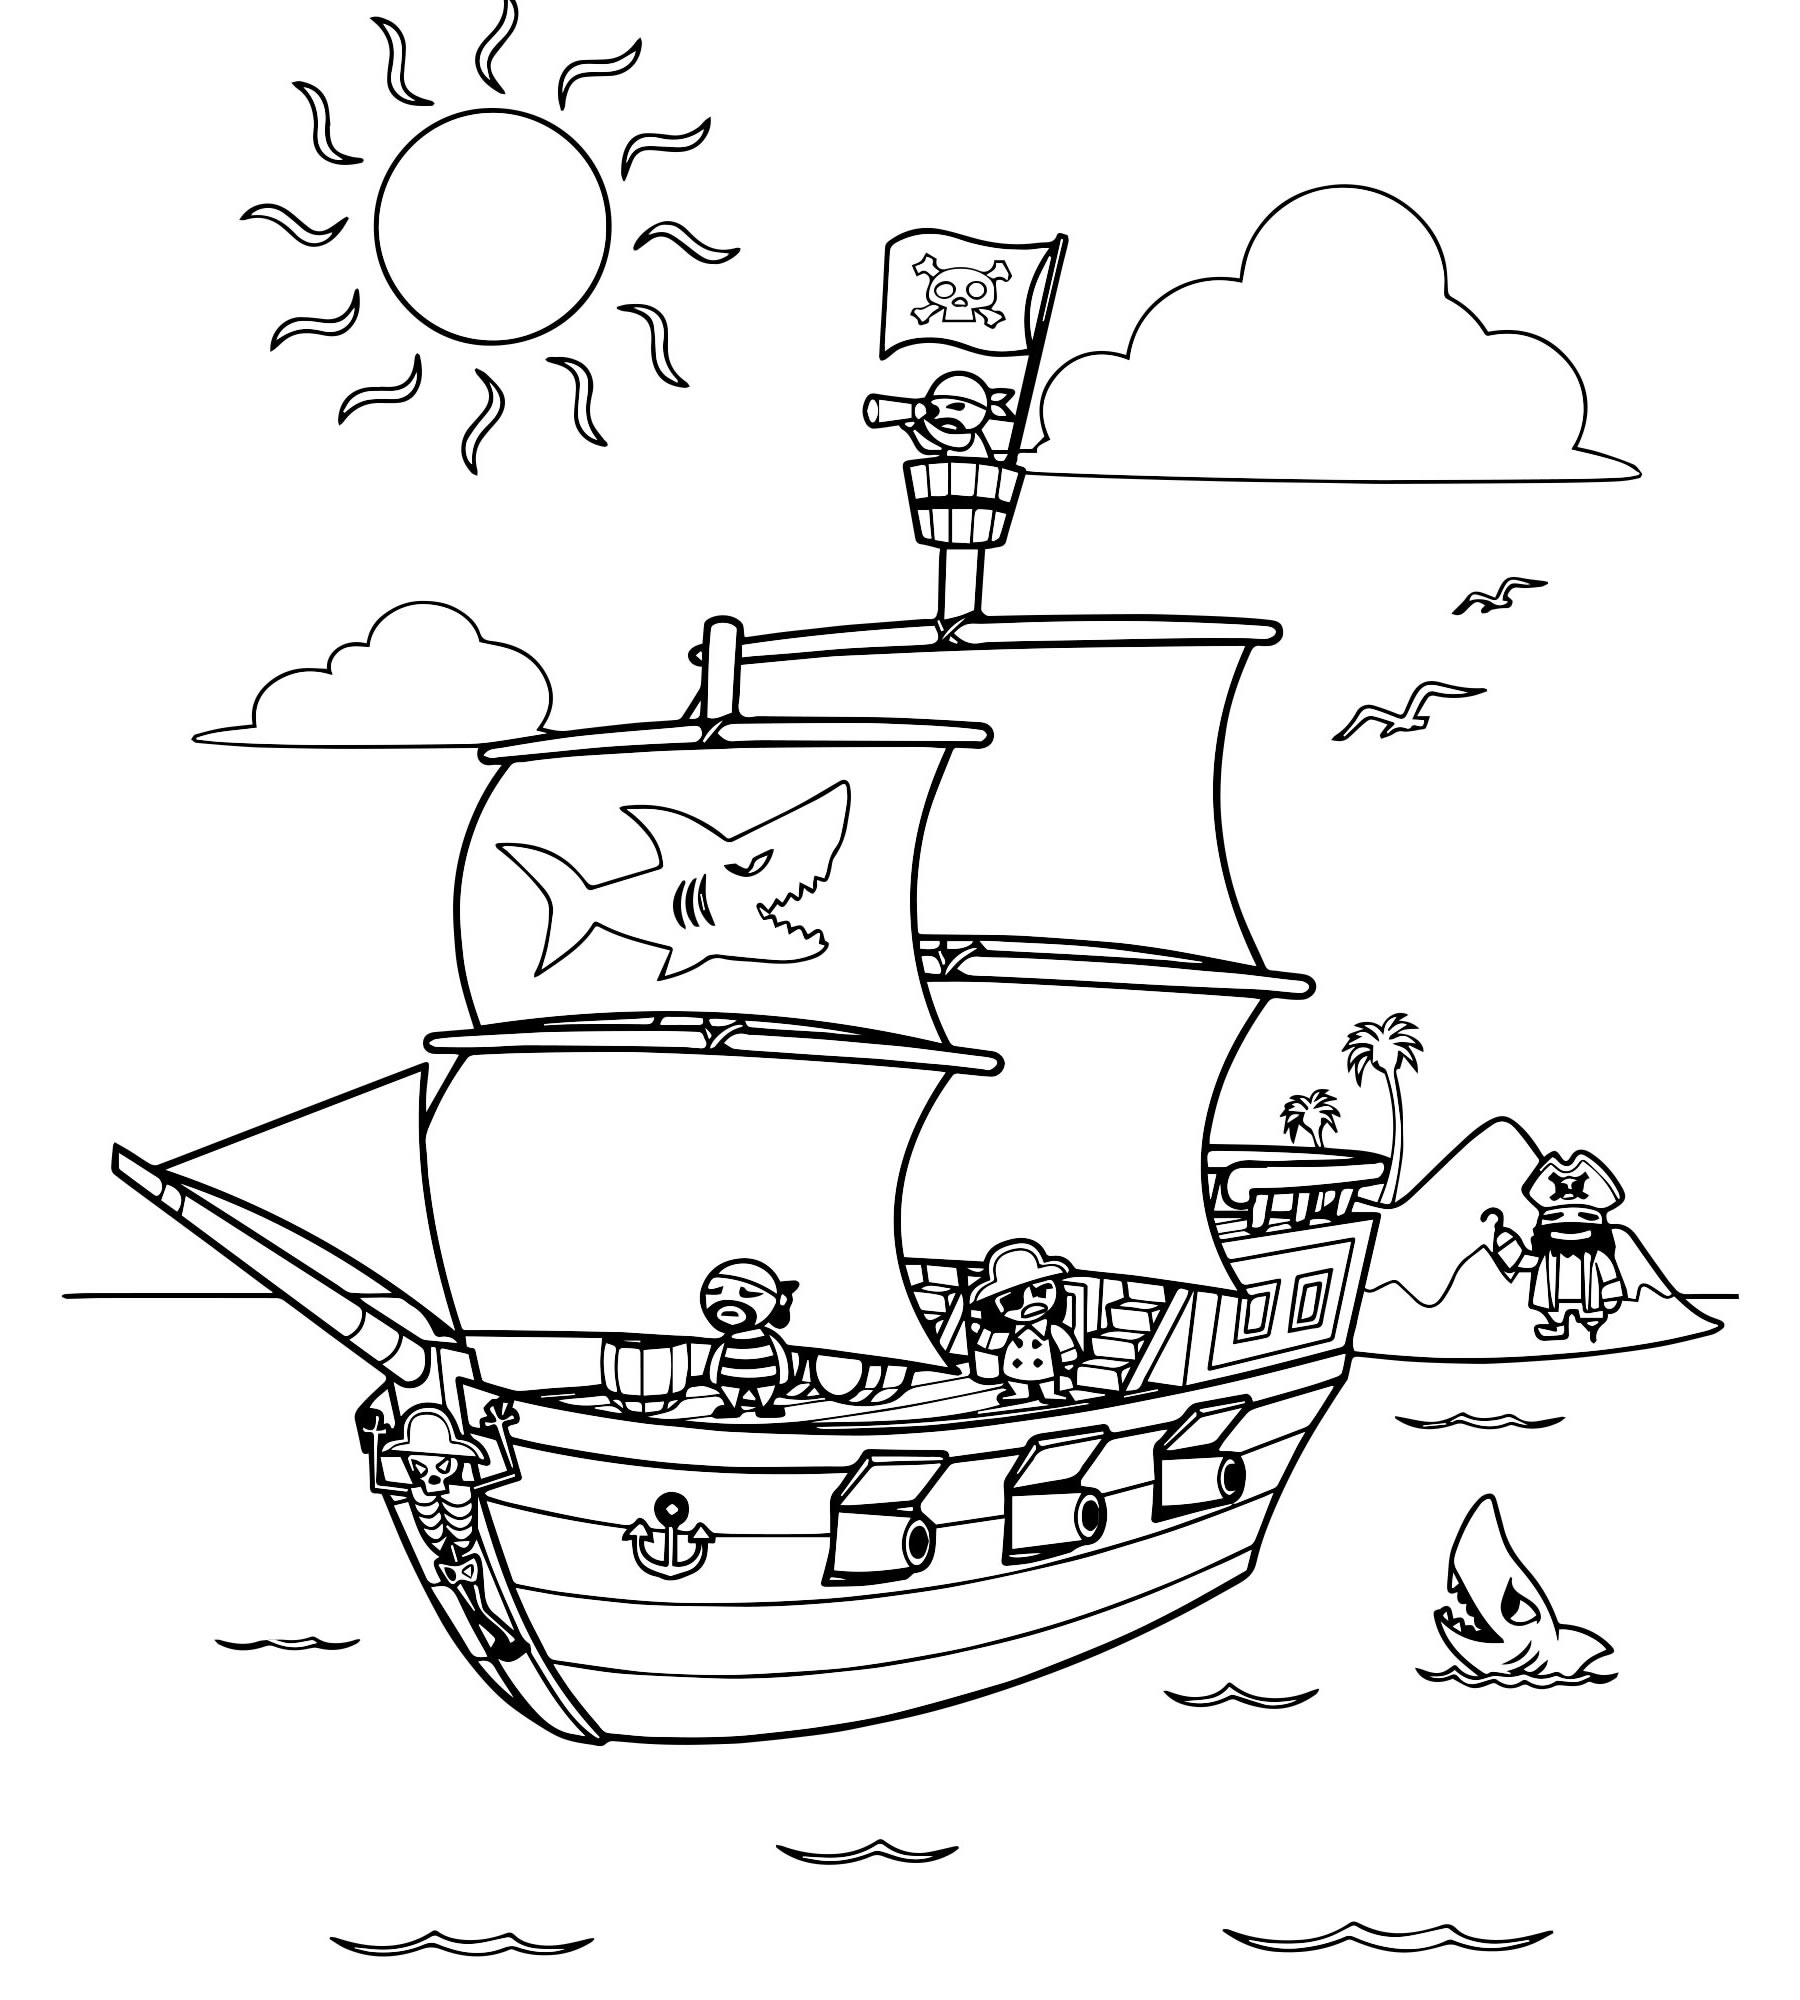 Pirate ship for kids #1